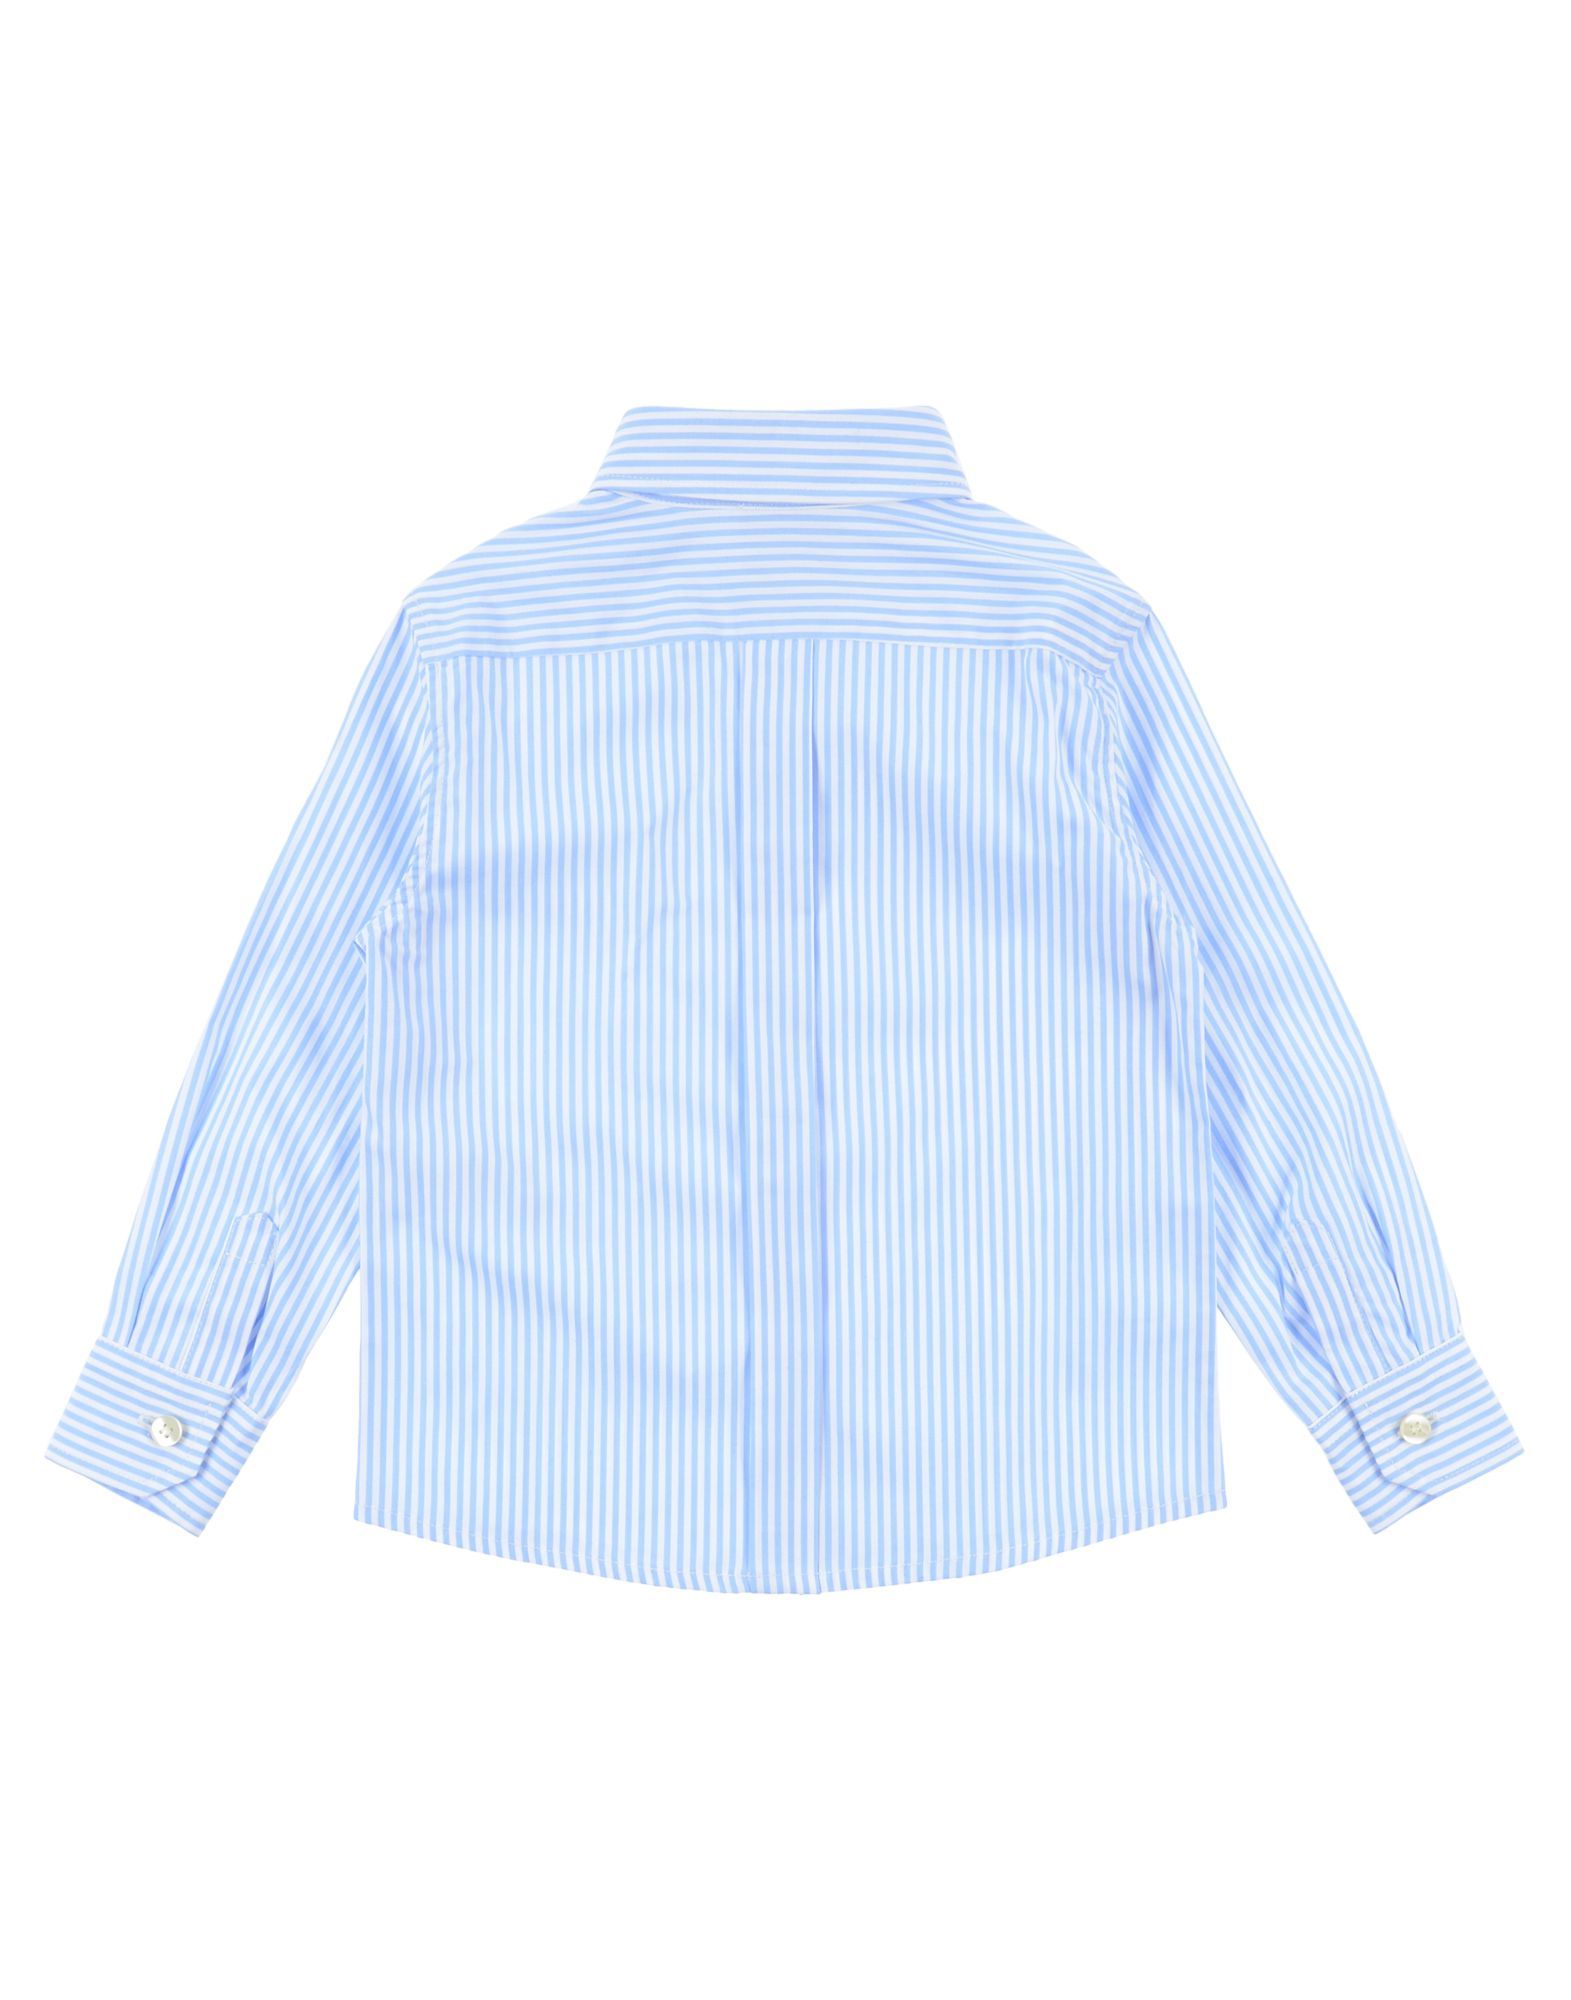 plain weave, no appliqués, stripes, lightweight knitted, front closure, button closing, long sleeves, buttoned cuffs, button-down collar, no pockets, wash at 30° c, dry cleanable, iron at 110° c max, do not bleach, do not tumble dry